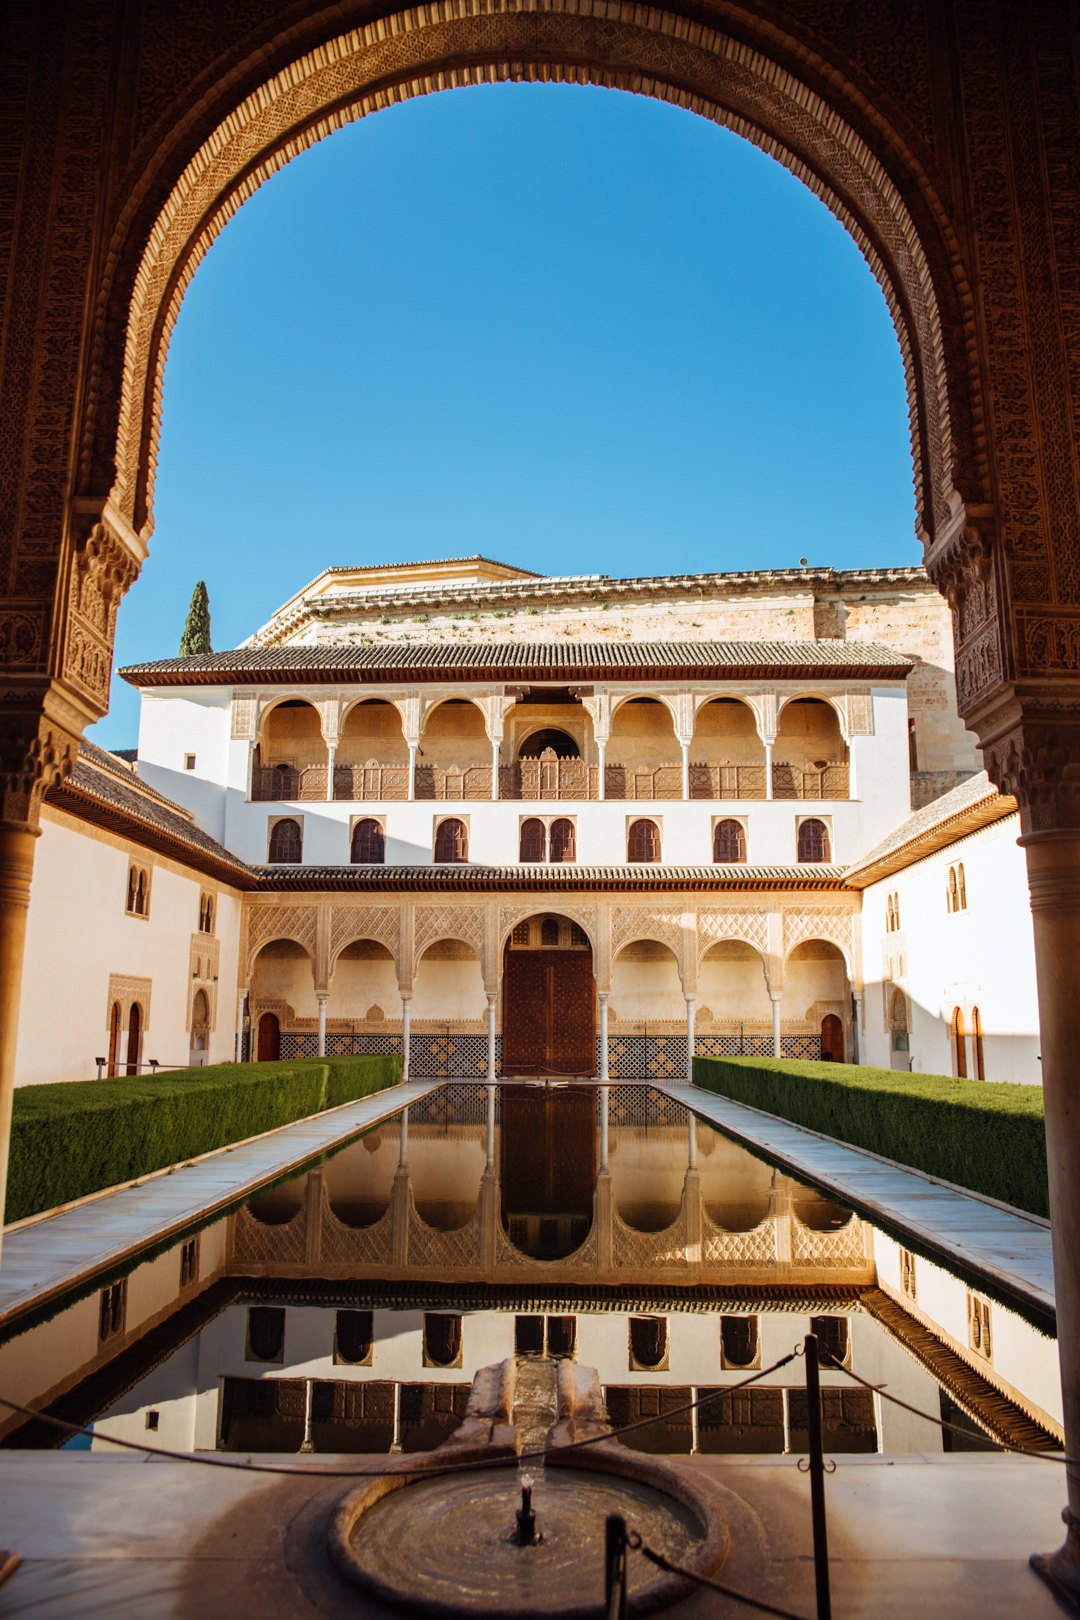 Courtyard in the Nasrid Palace, Alhambra in Granada